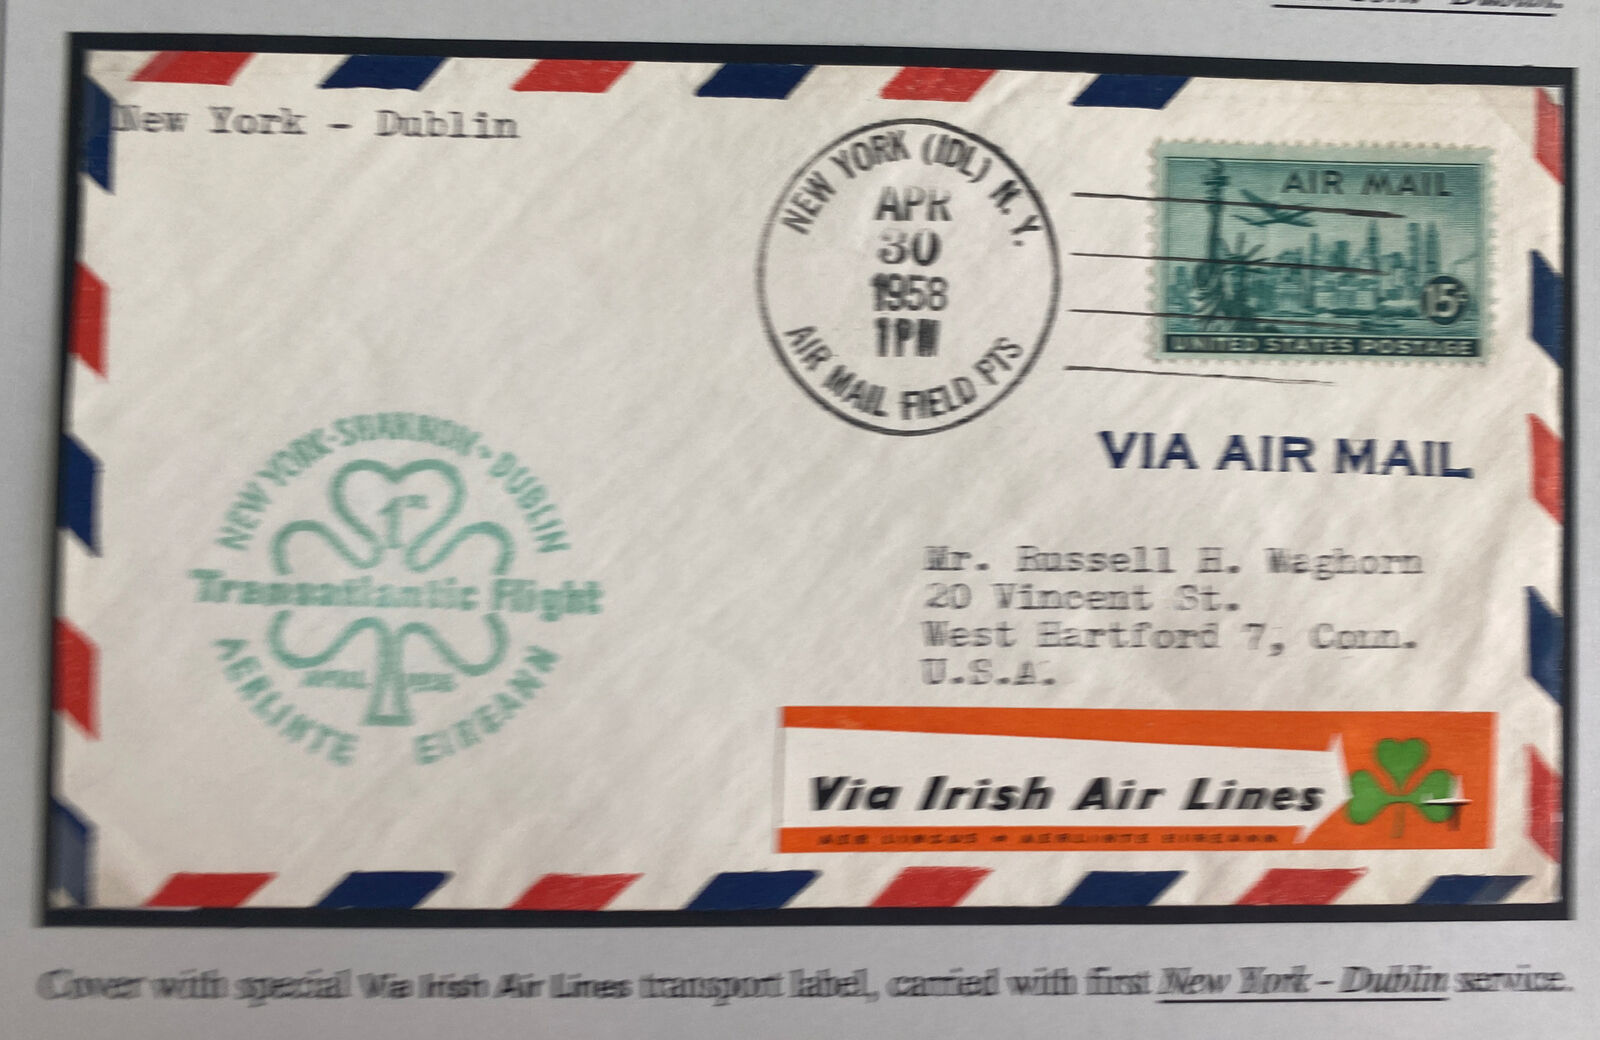 1958 New York USA First Trans Limited time for free shipping to Cover Ir Dublin Tucson Mall Flight Atlantic